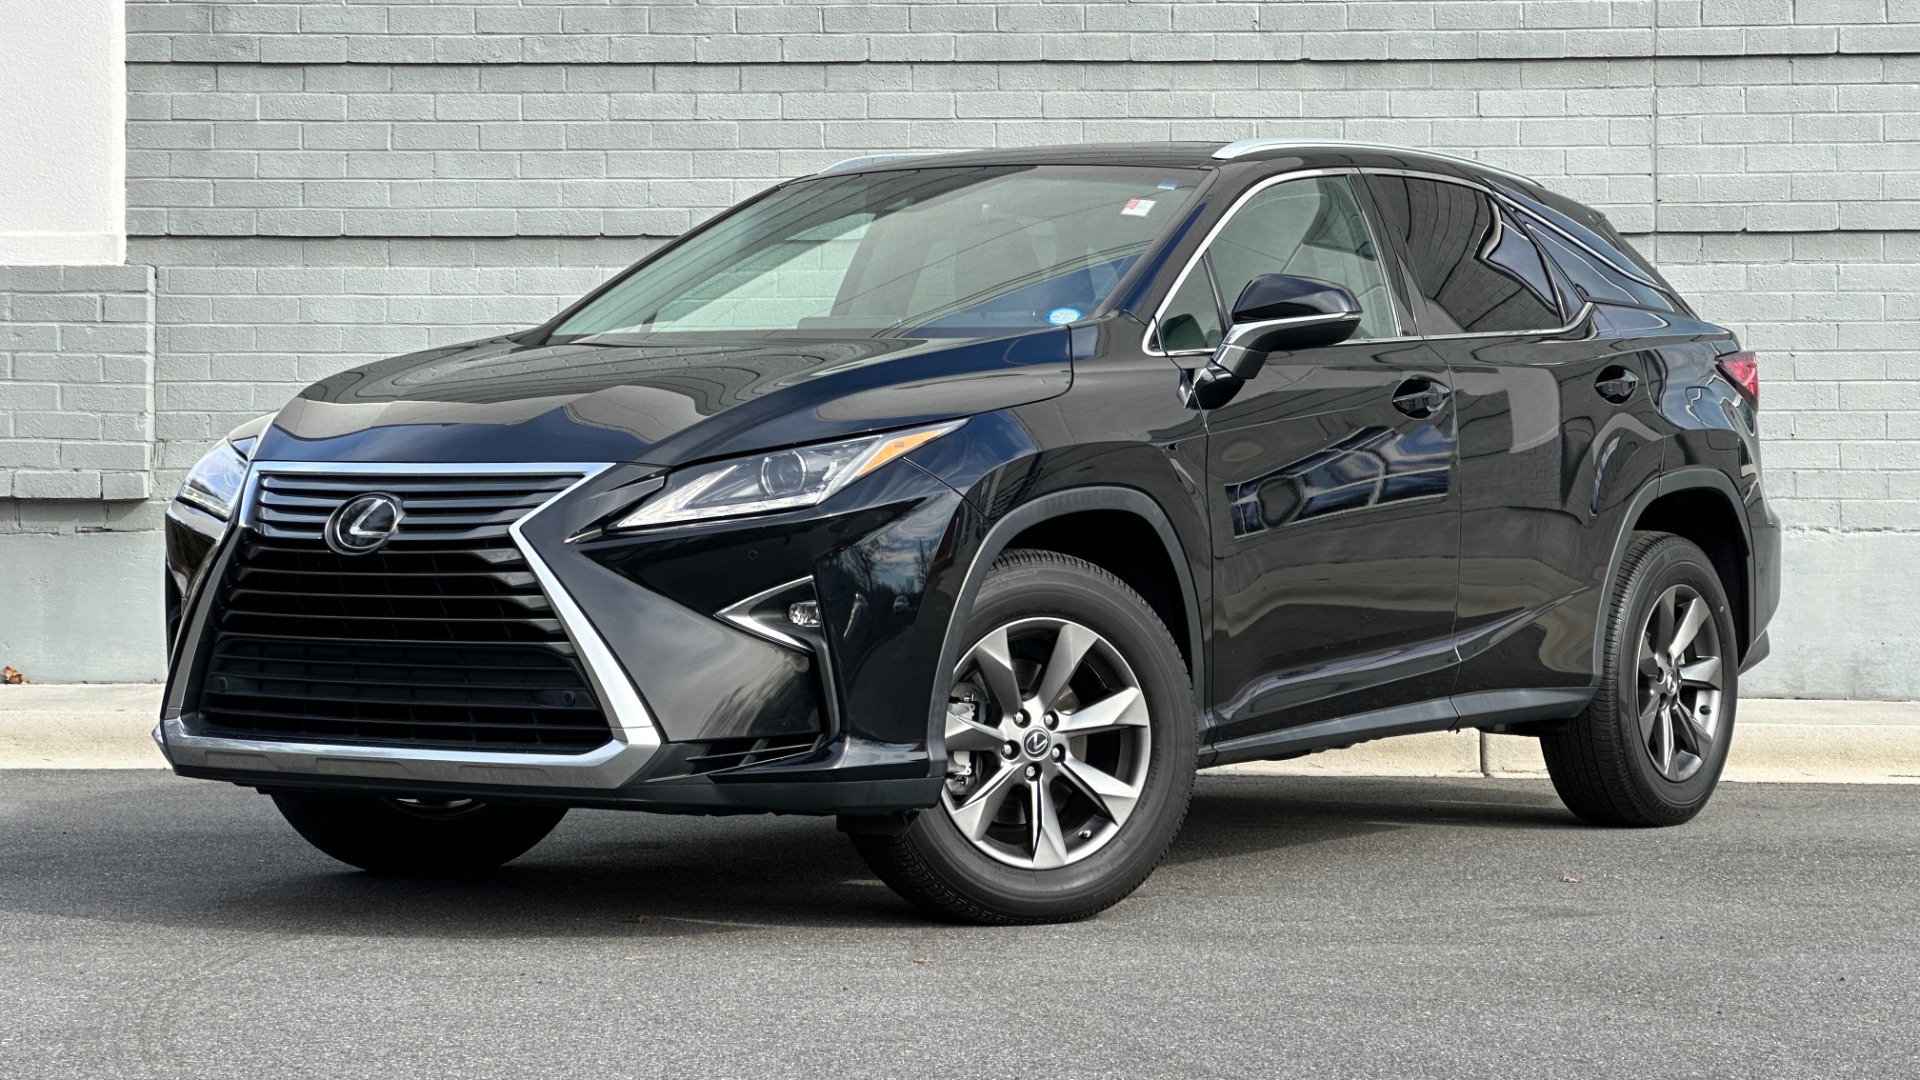 Used 2018 Lexus RX 350 3.5L V6 / PREMIUM / BLIND SPOT MONITOR / VENT STS / REARVIEW for sale $36,200 at Formula Imports in Charlotte NC 28227 1